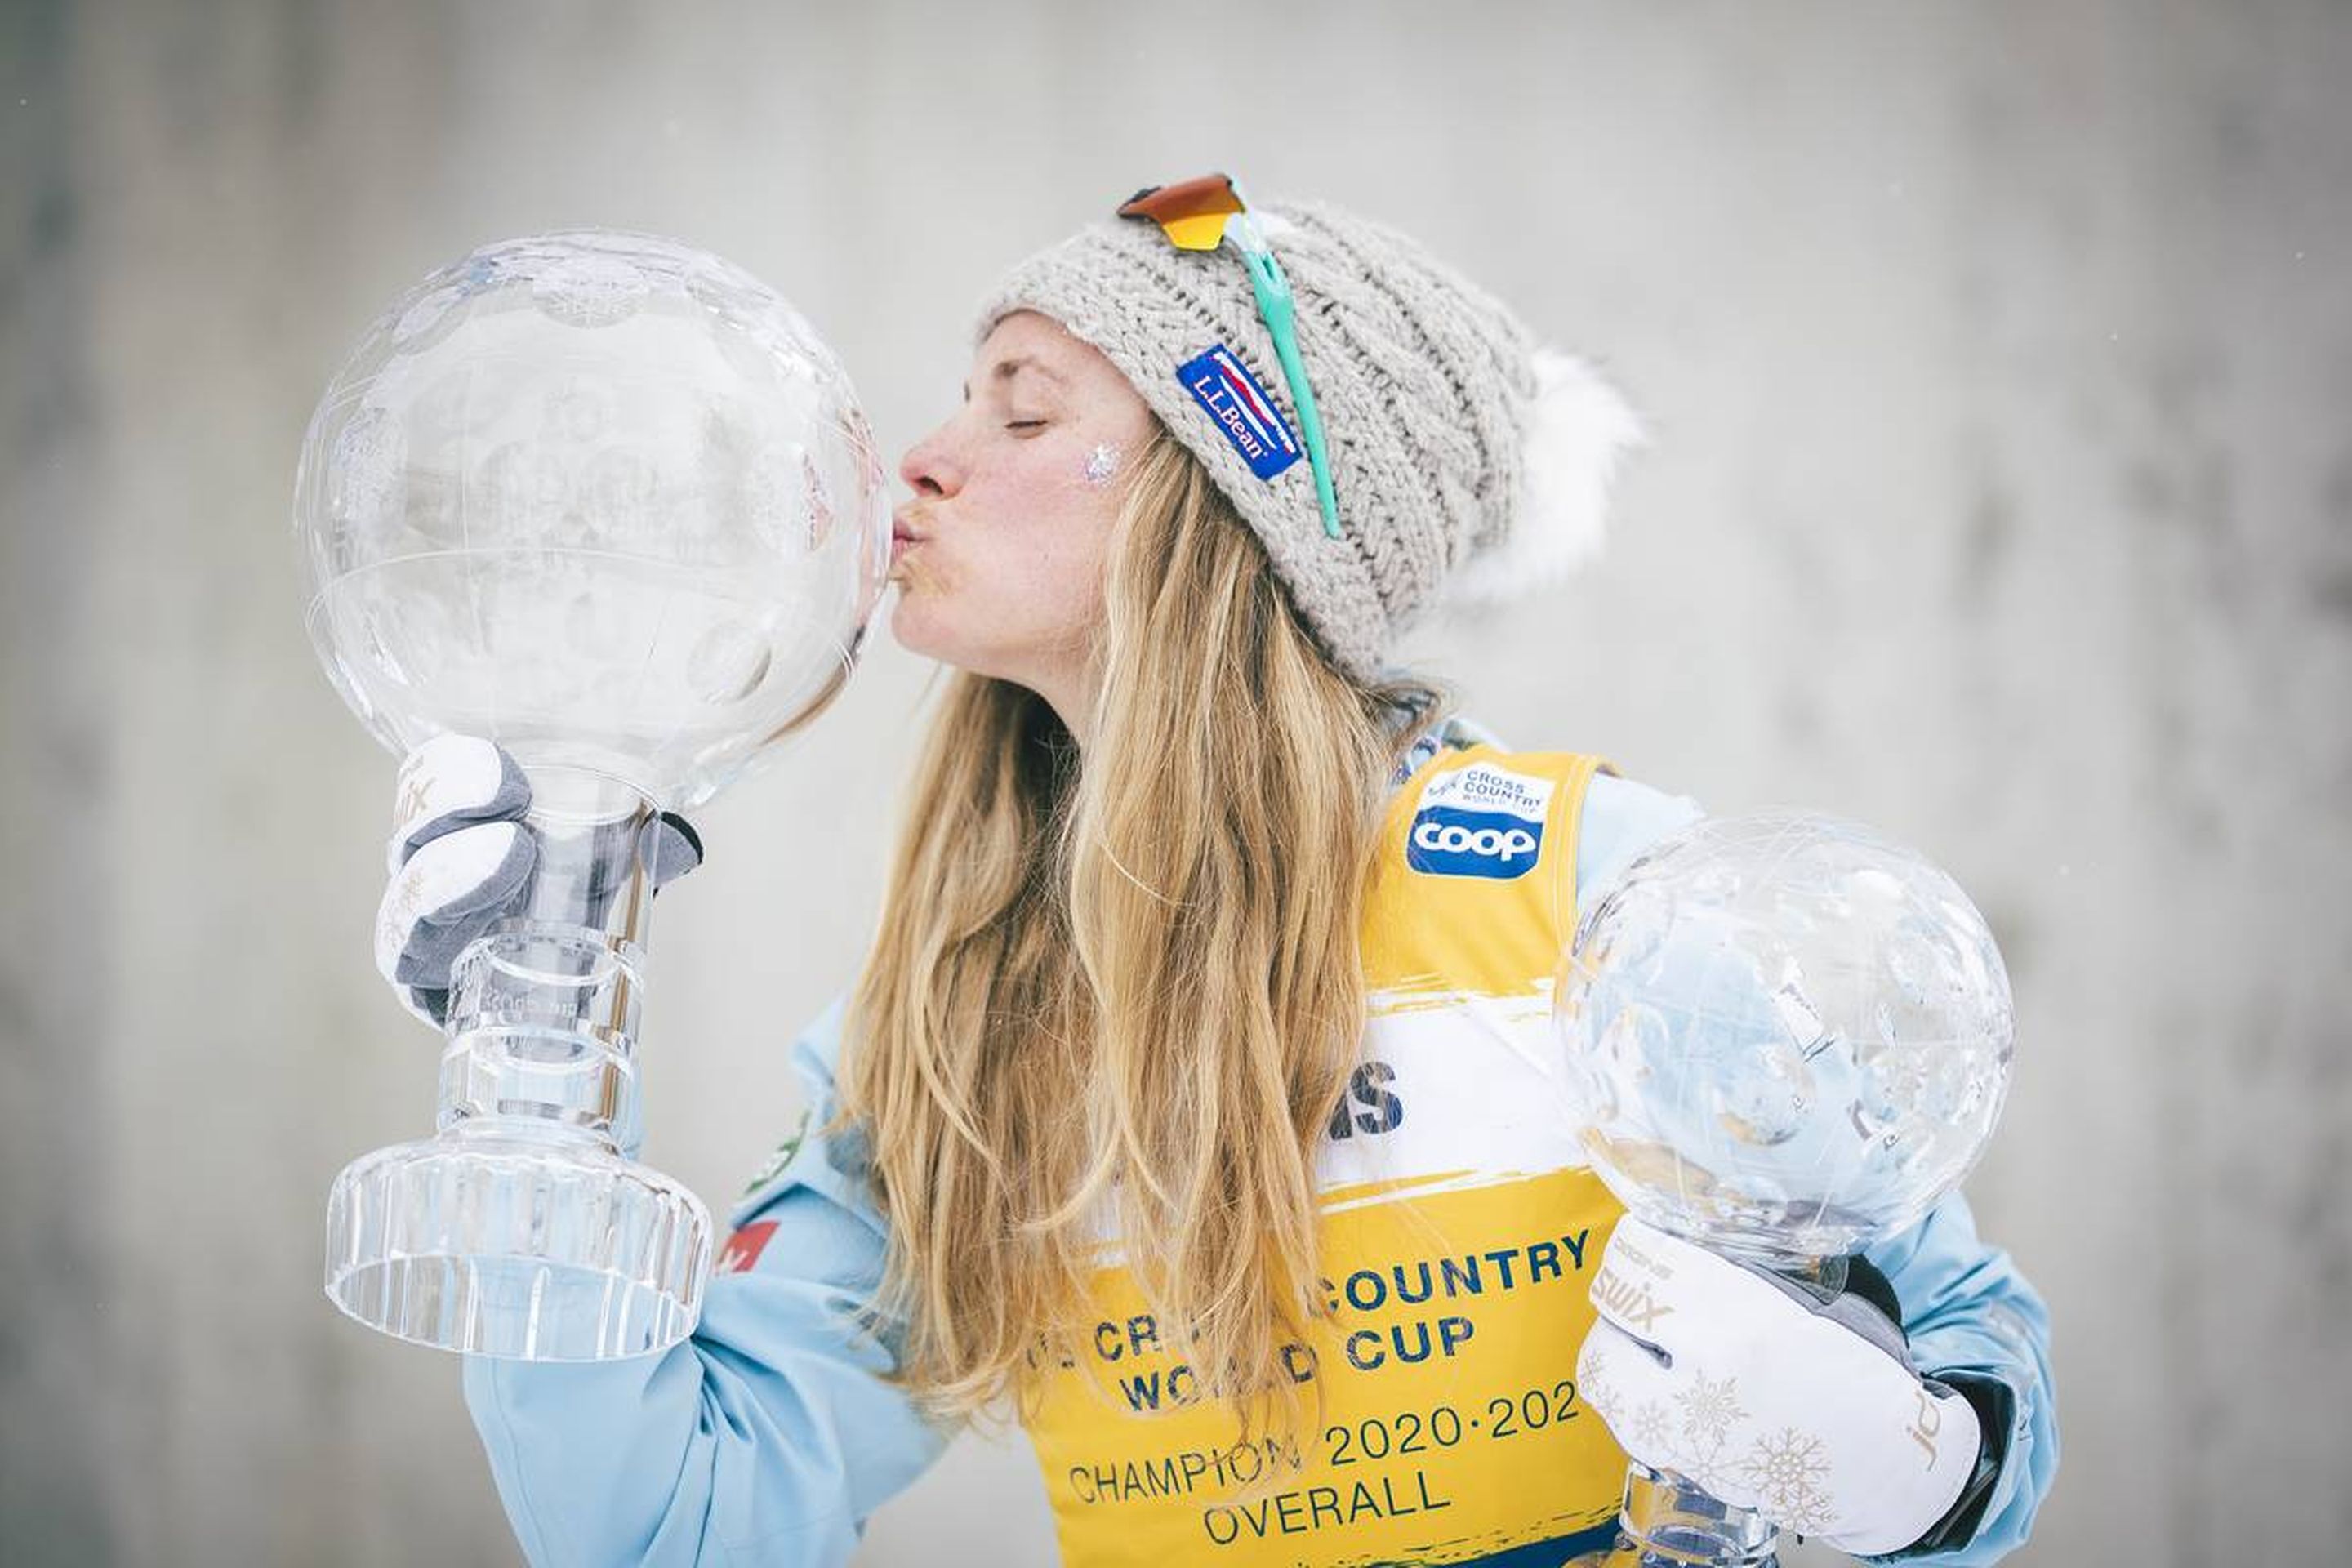 Jessie Diggins kissing the overall Crystal Globe in Engadin, Switzerland, in March 2021 © NordicFocus